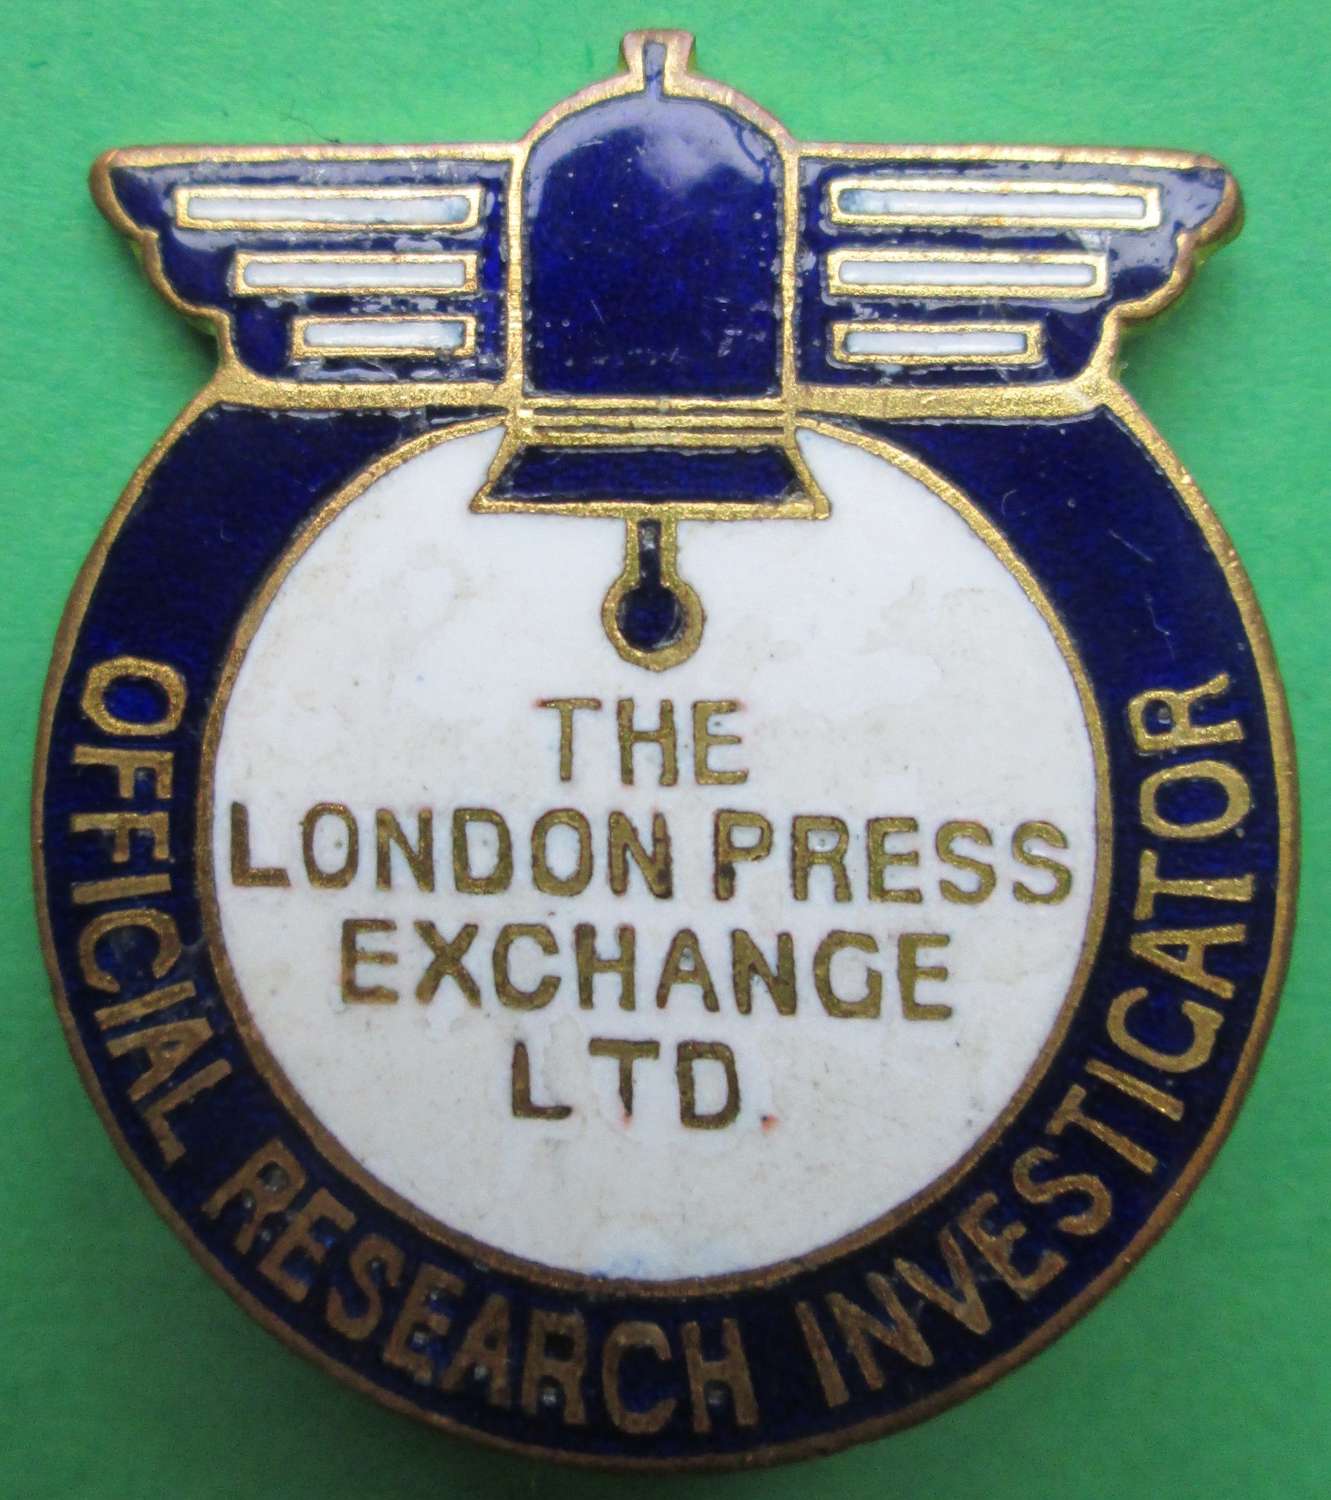 An early London Press Official Exchange investigator's Lapel badge